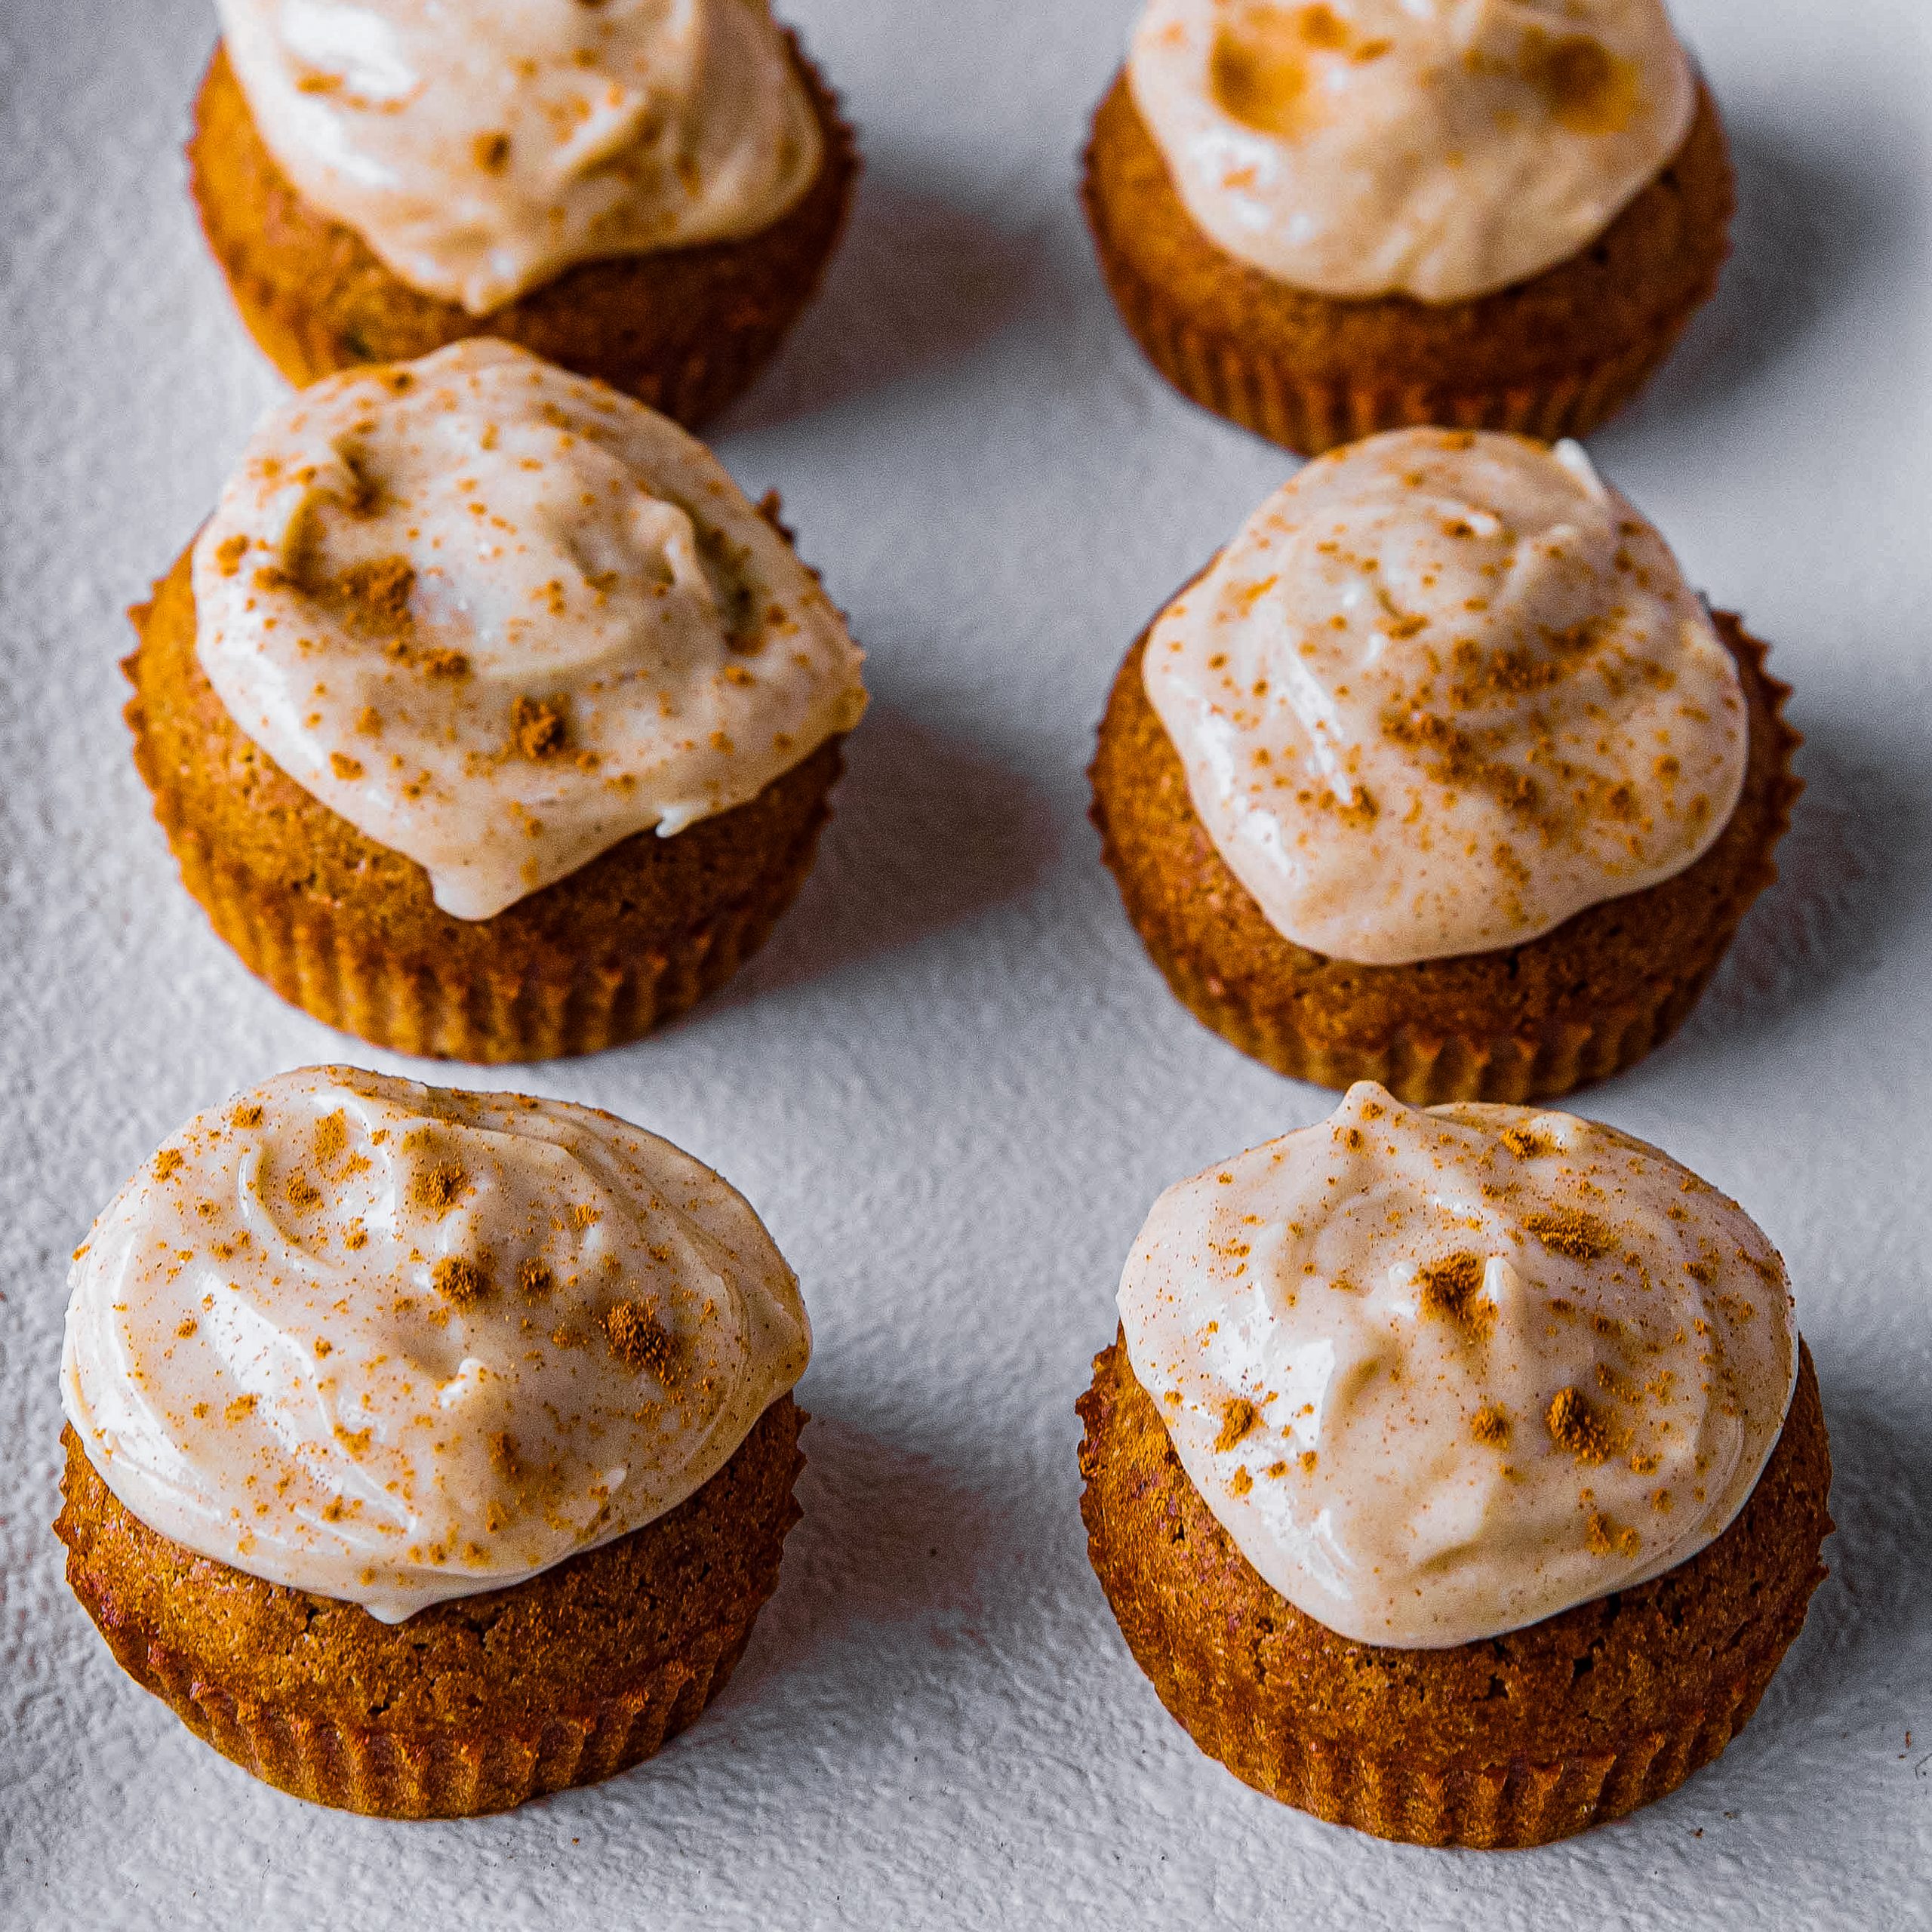 Pumpkin Spice Cupcakes with Cinnamon Frosting
